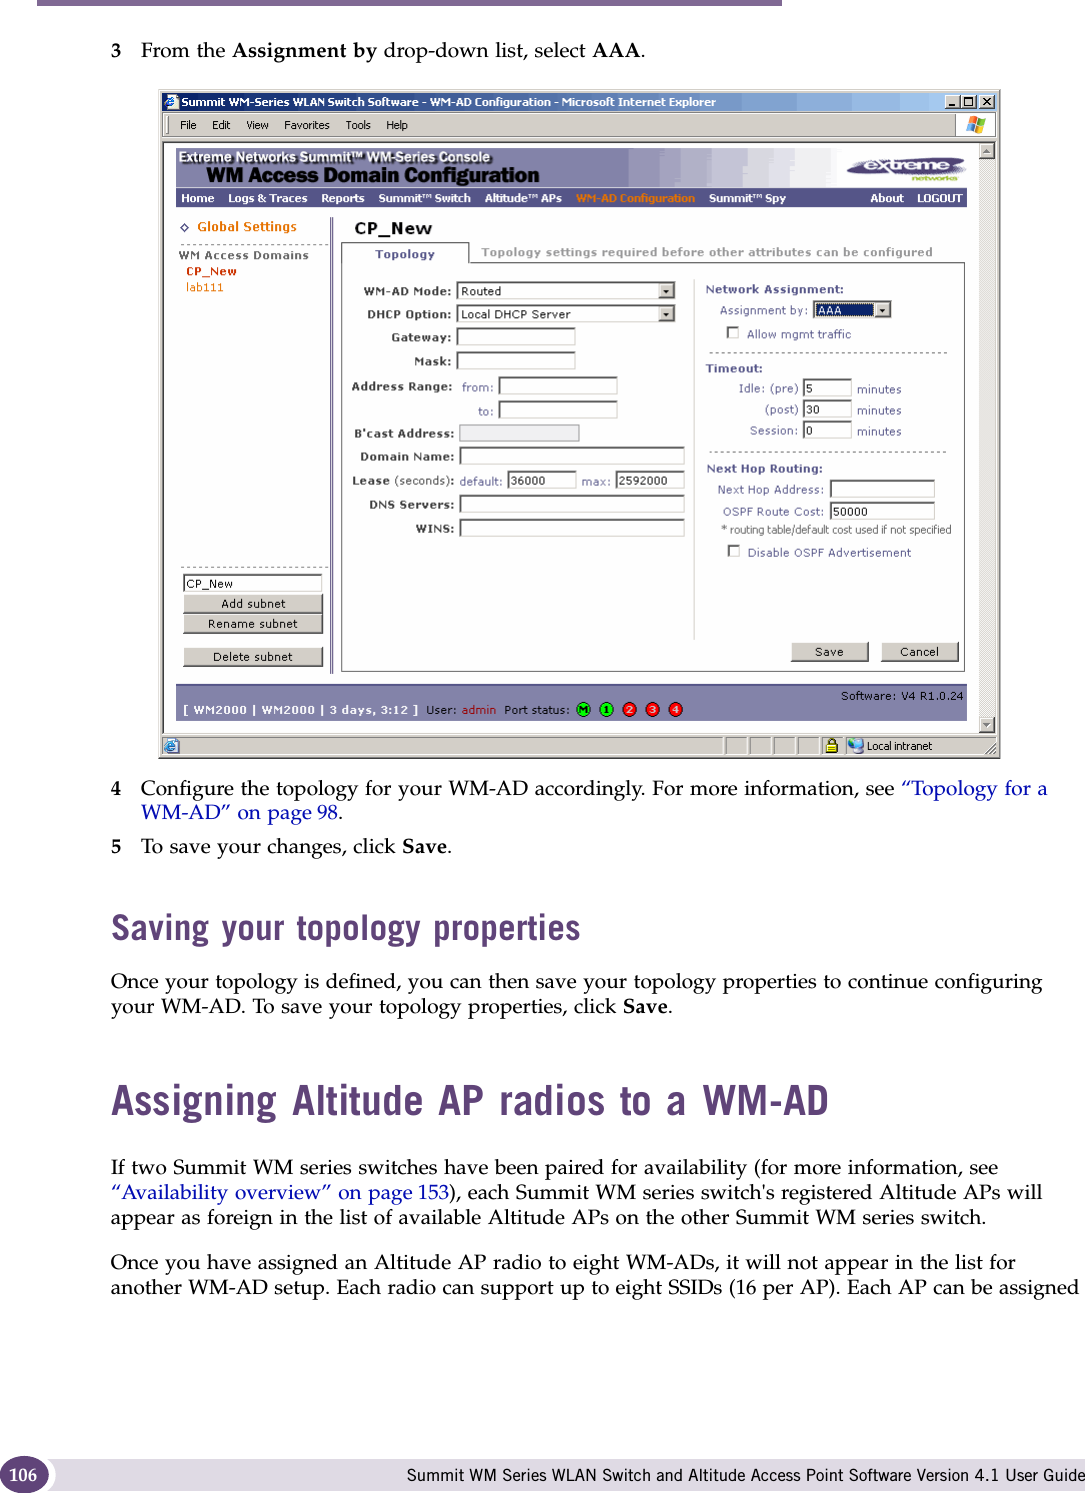 WM Access Domain Services configuration Summit WM Series WLAN Switch and Altitude Access Point Software Version 4.1 User Guide1063From the Assignment by drop-down list, select AAA.4Configure the topology for your WM-AD accordingly. For more information, see “Topology for a WM-AD” on page 98.5To save your changes, click Save.Saving your topology propertiesOnce your topology is defined, you can then save your topology properties to continue configuring your WM-AD. To save your topology properties, click Save.Assigning Altitude AP radios to a WM-ADIf two Summit WM series switches have been paired for availability (for more information, see “Availability overview” on page 153), each Summit WM series switch&apos;s registered Altitude APs will appear as foreign in the list of available Altitude APs on the other Summit WM series switch.Once you have assigned an Altitude AP radio to eight WM-ADs, it will not appear in the list for another WM-AD setup. Each radio can support up to eight SSIDs (16 per AP). Each AP can be assigned 